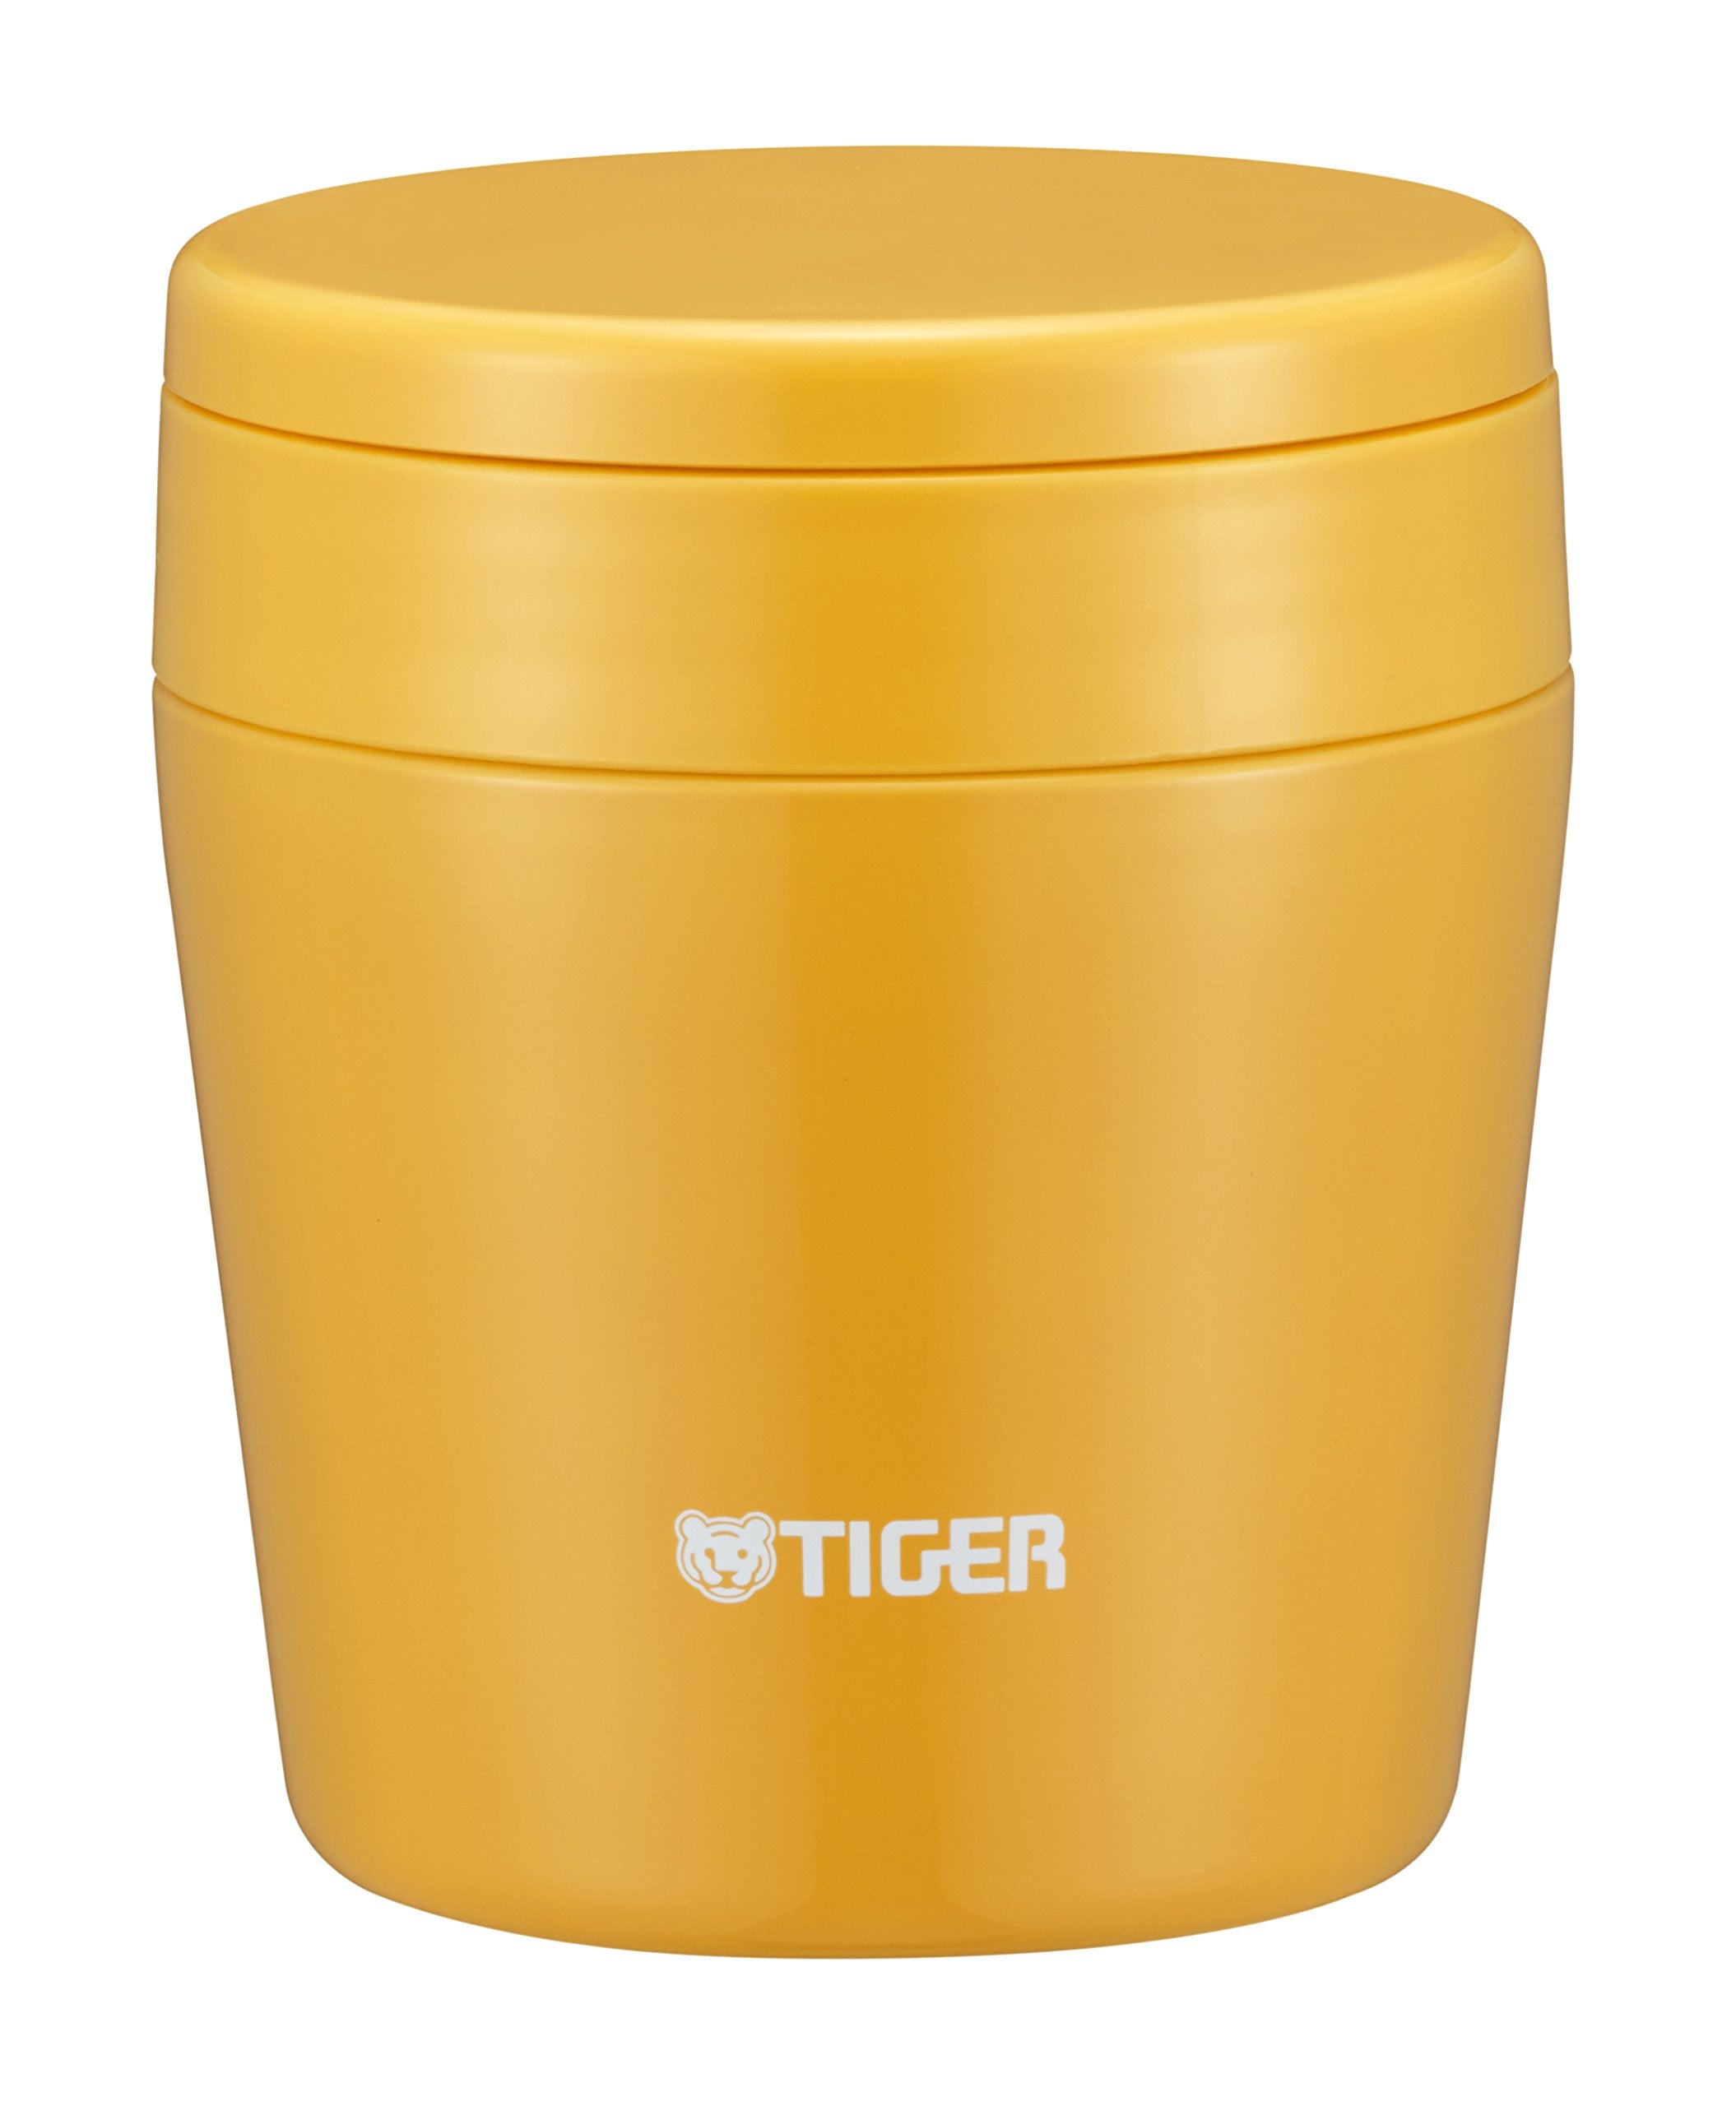 Tiger Thermos Vacuum Insulated Soup Jar 250ml Japan Thermal Lunch Box Wide Mouth Round Bottom Saffron Yellow Mcl-B025-Ys